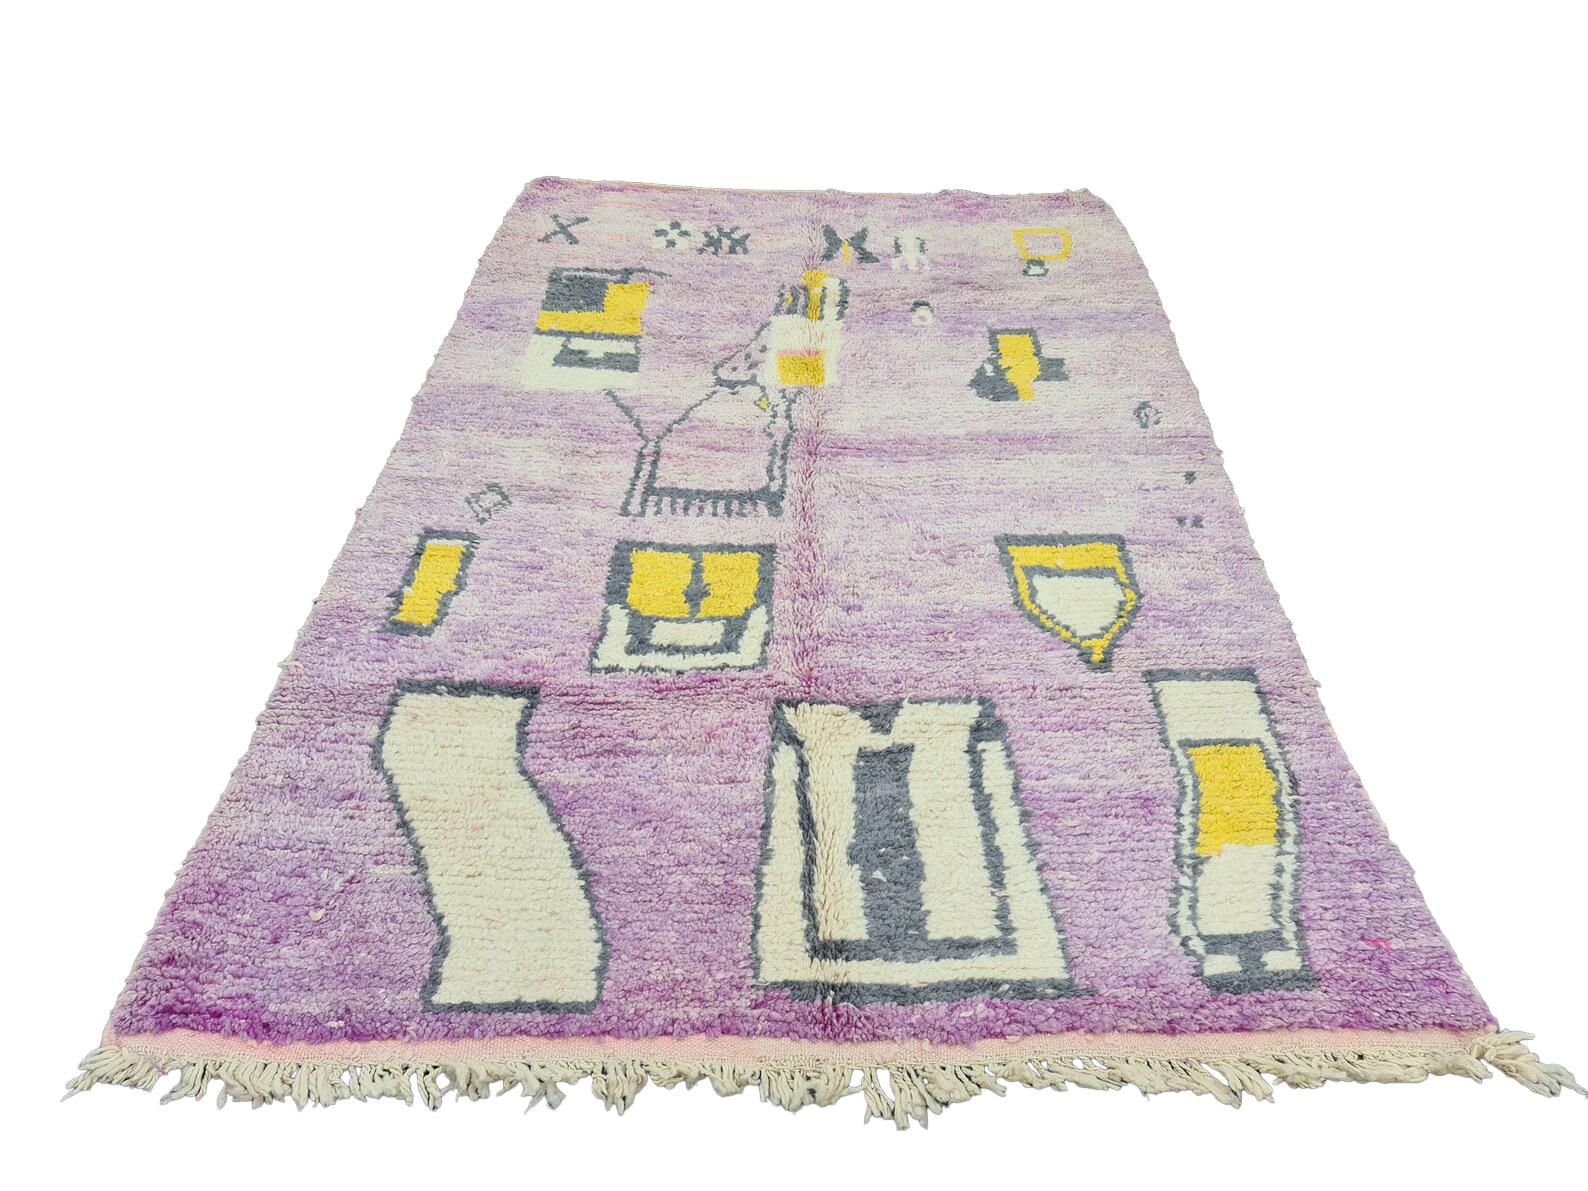 Moroccan Boujaad rug in faded purple with irregular yellow and black geometric patterns reflecting the artistic blend of Arabic and Berber cultures in Morocco. Every handmade rug is washed and dried in the mountain air and made with the finest